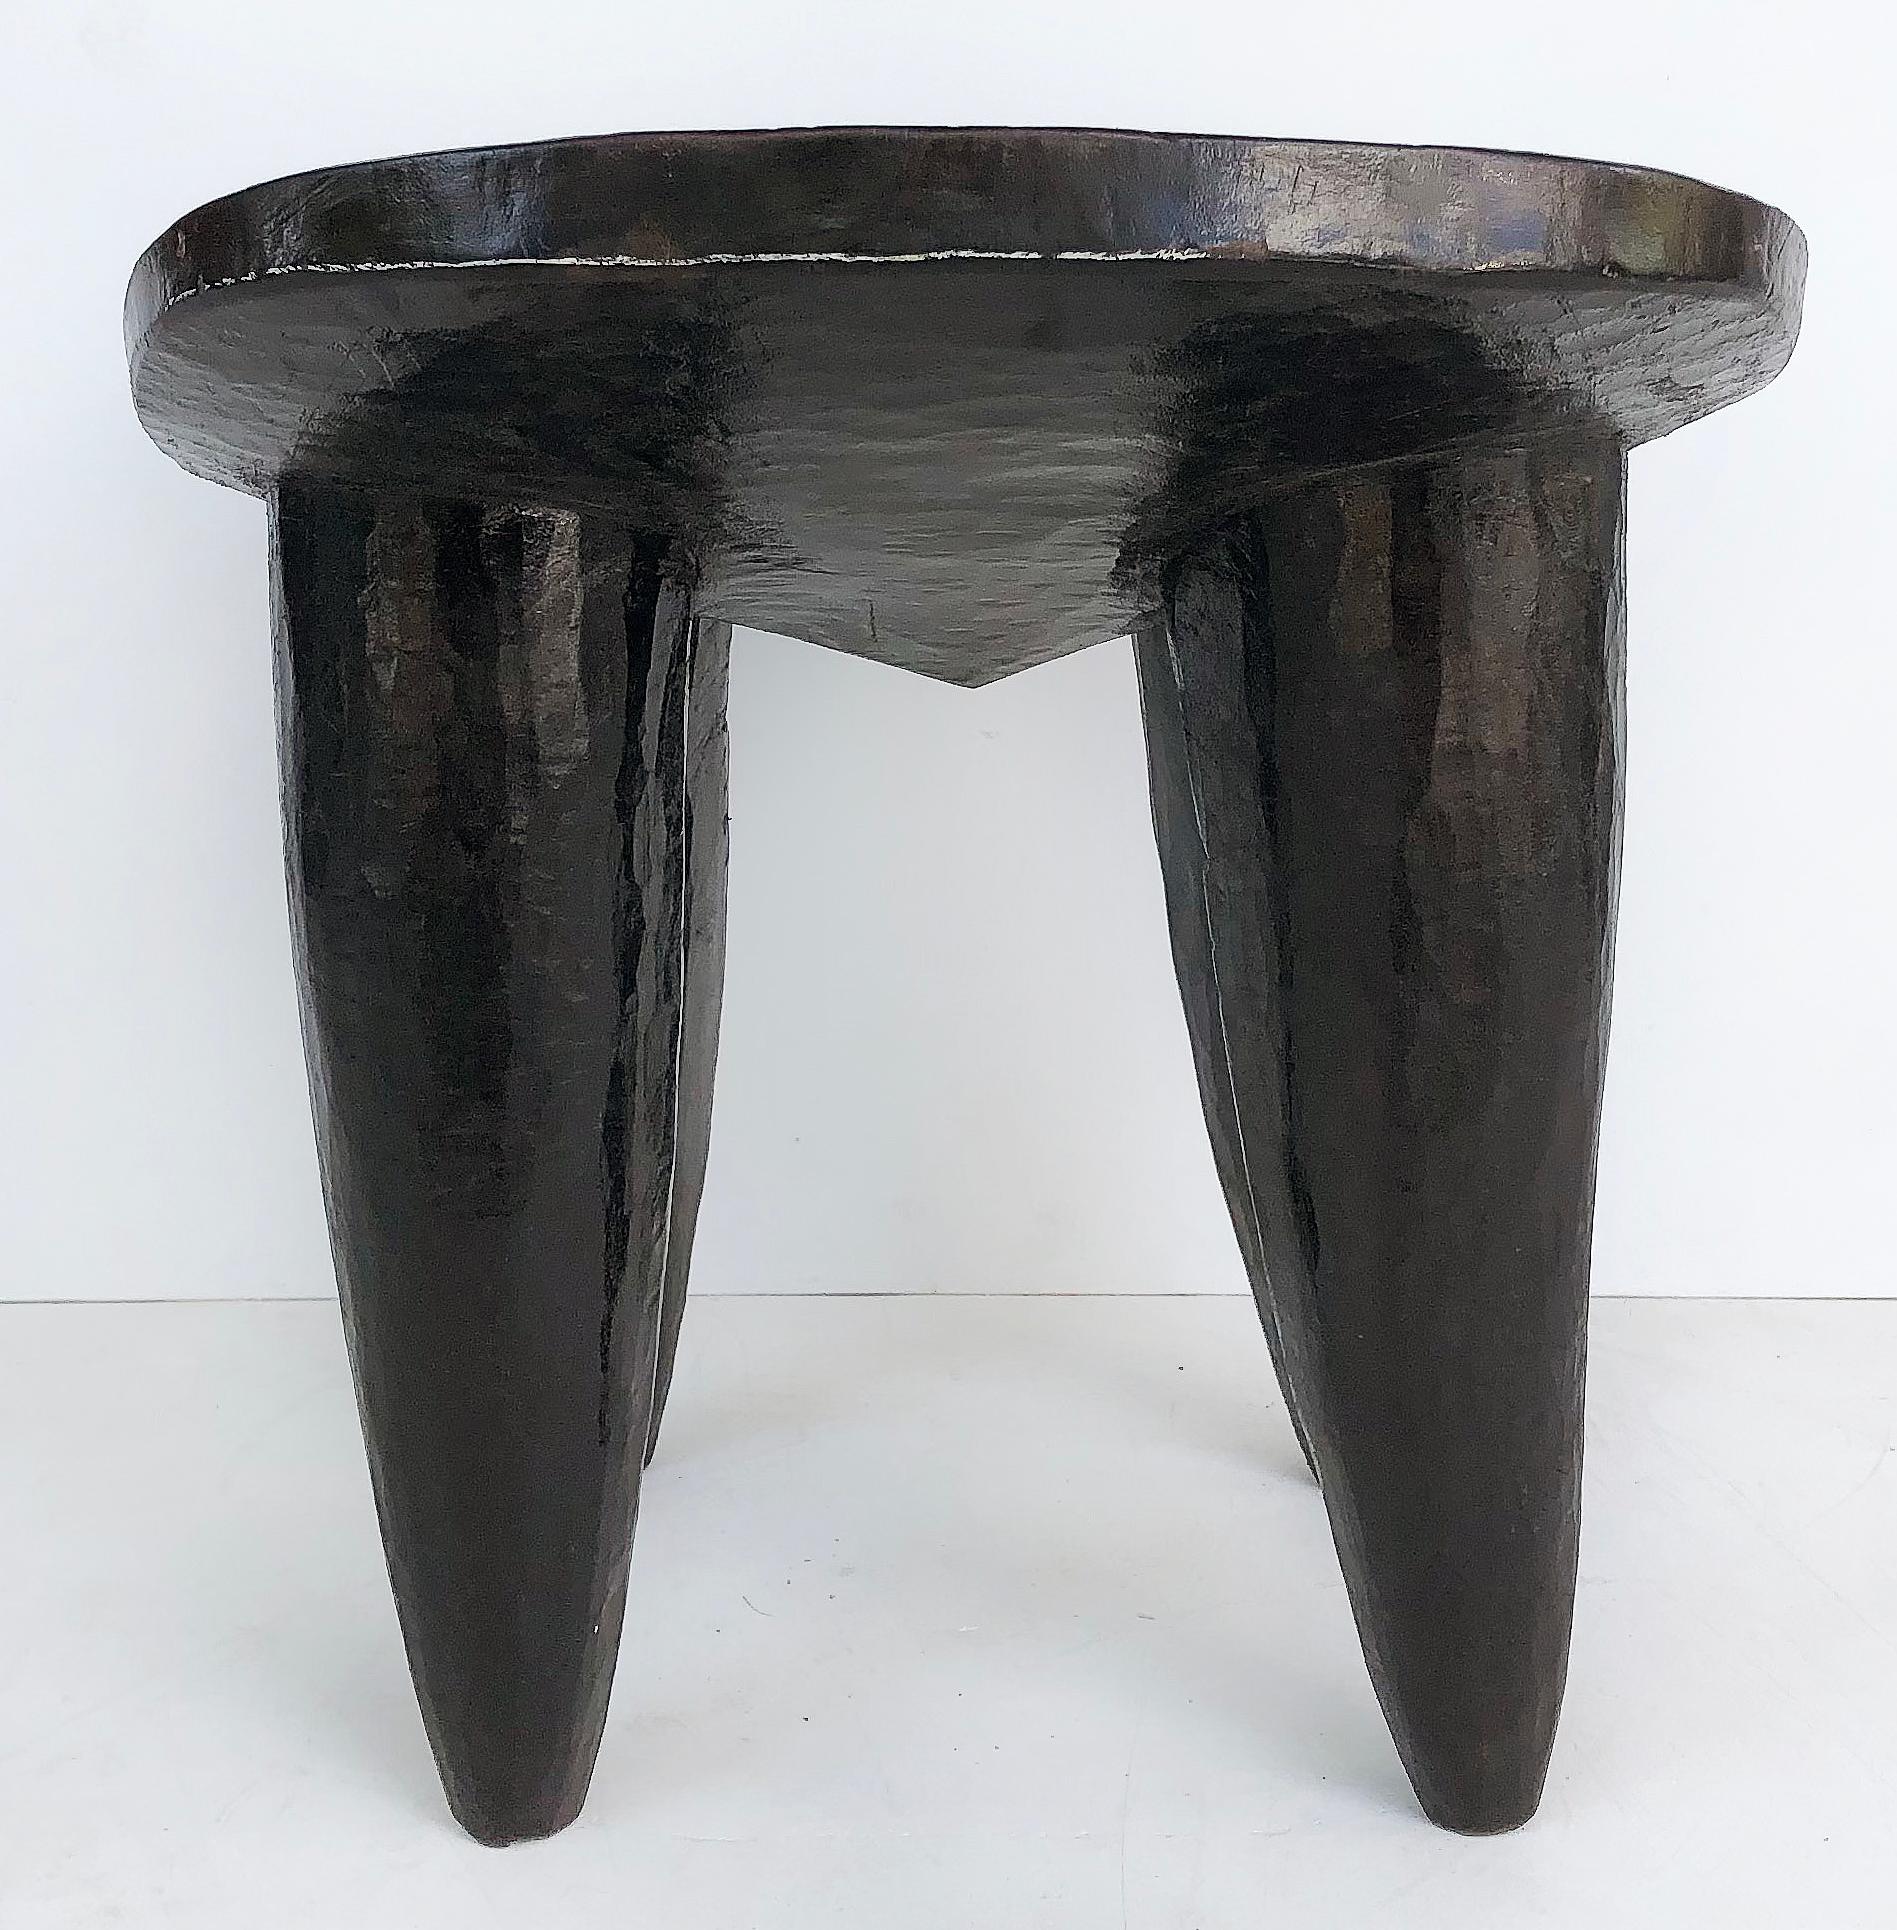 Ivorian African Hand Carved Senufo Stool from Cote d'Ivoire